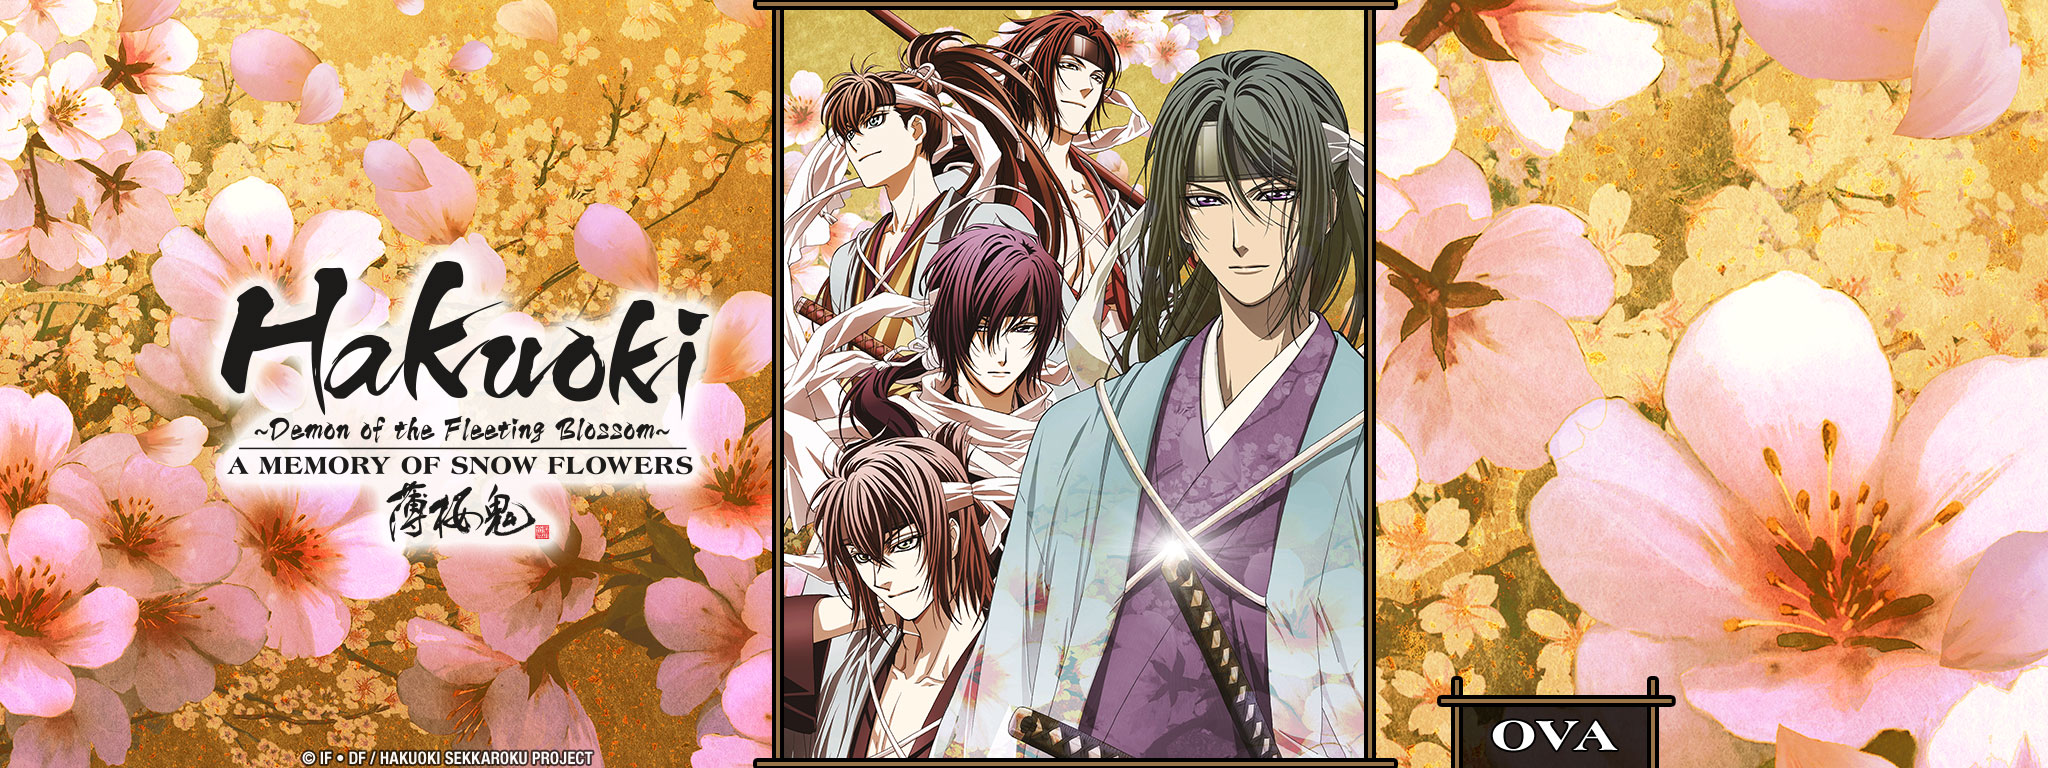 Title Art for Hakuoki ~Demon of the Fleeting Blossom~ A Memory of Snow Flowers